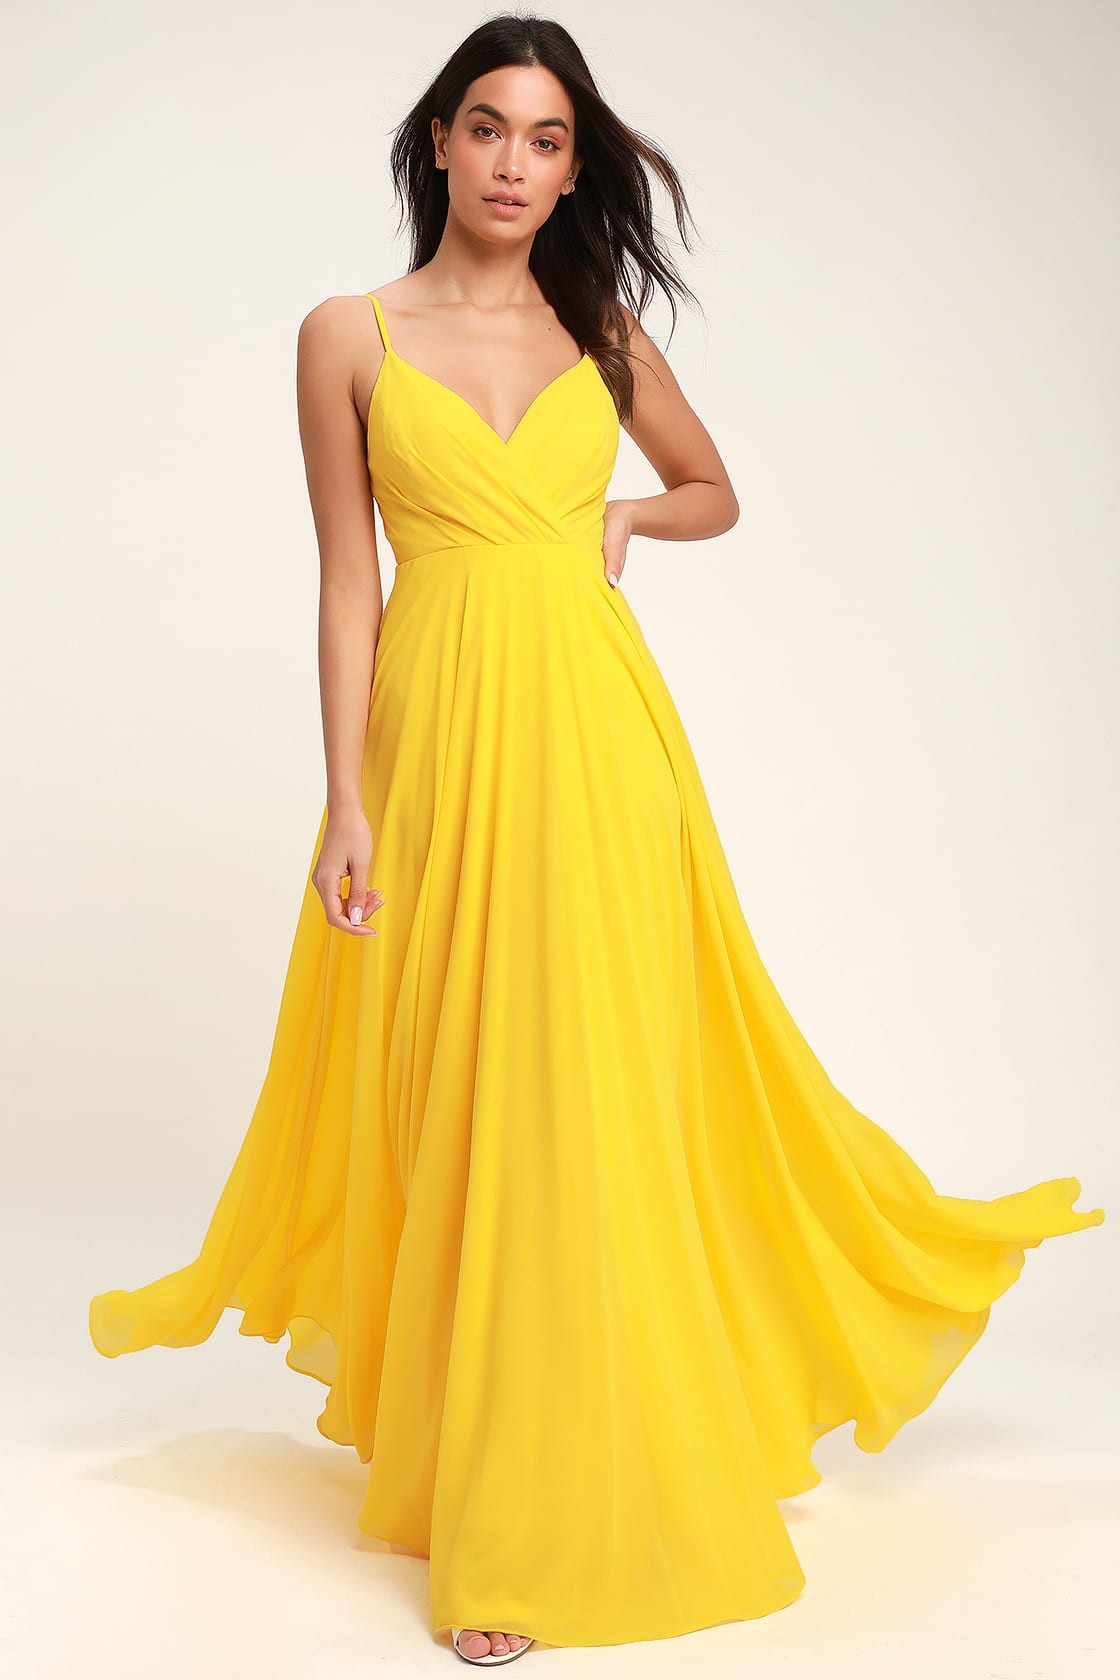 blue and yellow dress for wedding guest